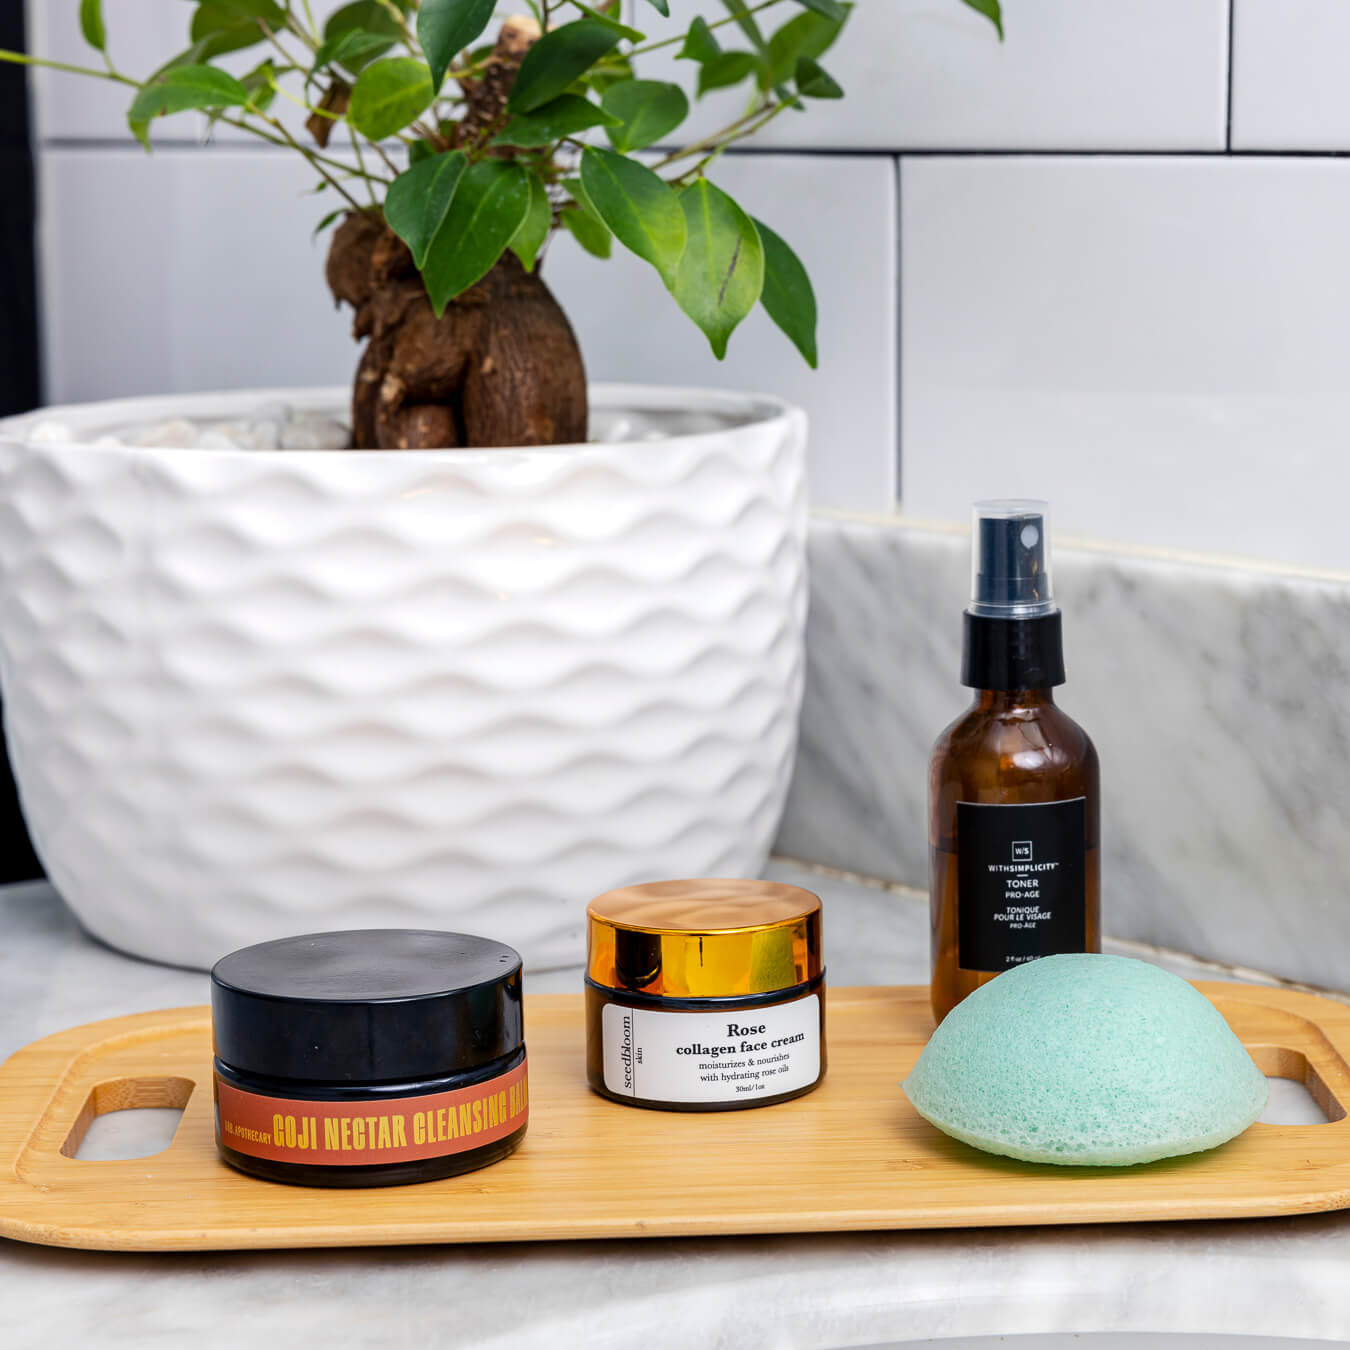 Products from the Rise and Shine box, including the Goji nectar cleansing balm, Pro-Age toner, Rose collagen face cream, and konjac sponge sitting on a bamboo tray in front of a leafy green plant